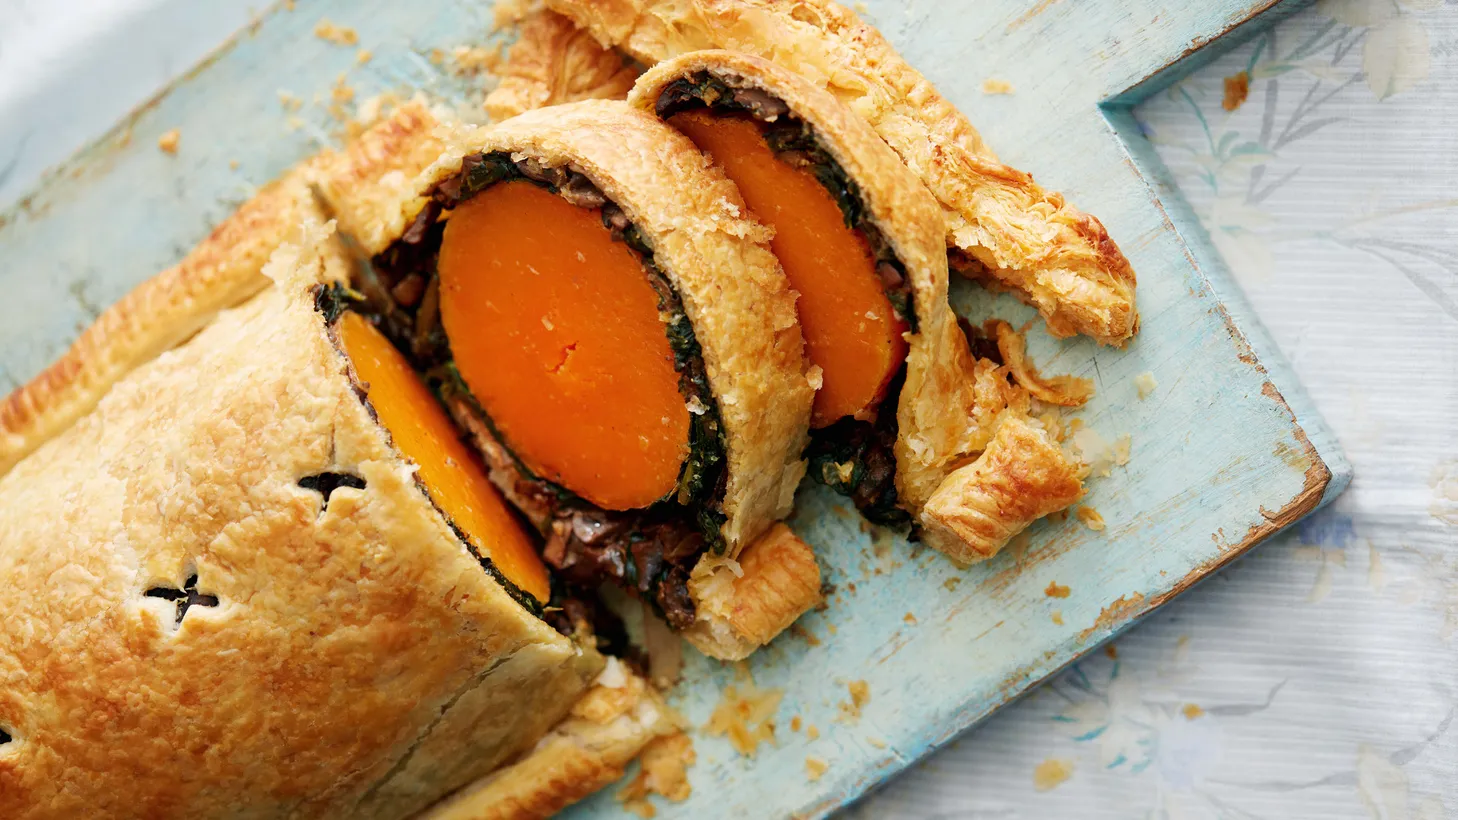 Putting a spin on an iconic dish, the McAnuff brothers’ jerk-spiced squash and callaloo wellington is a nod to their Jamaican heritage and London roots.